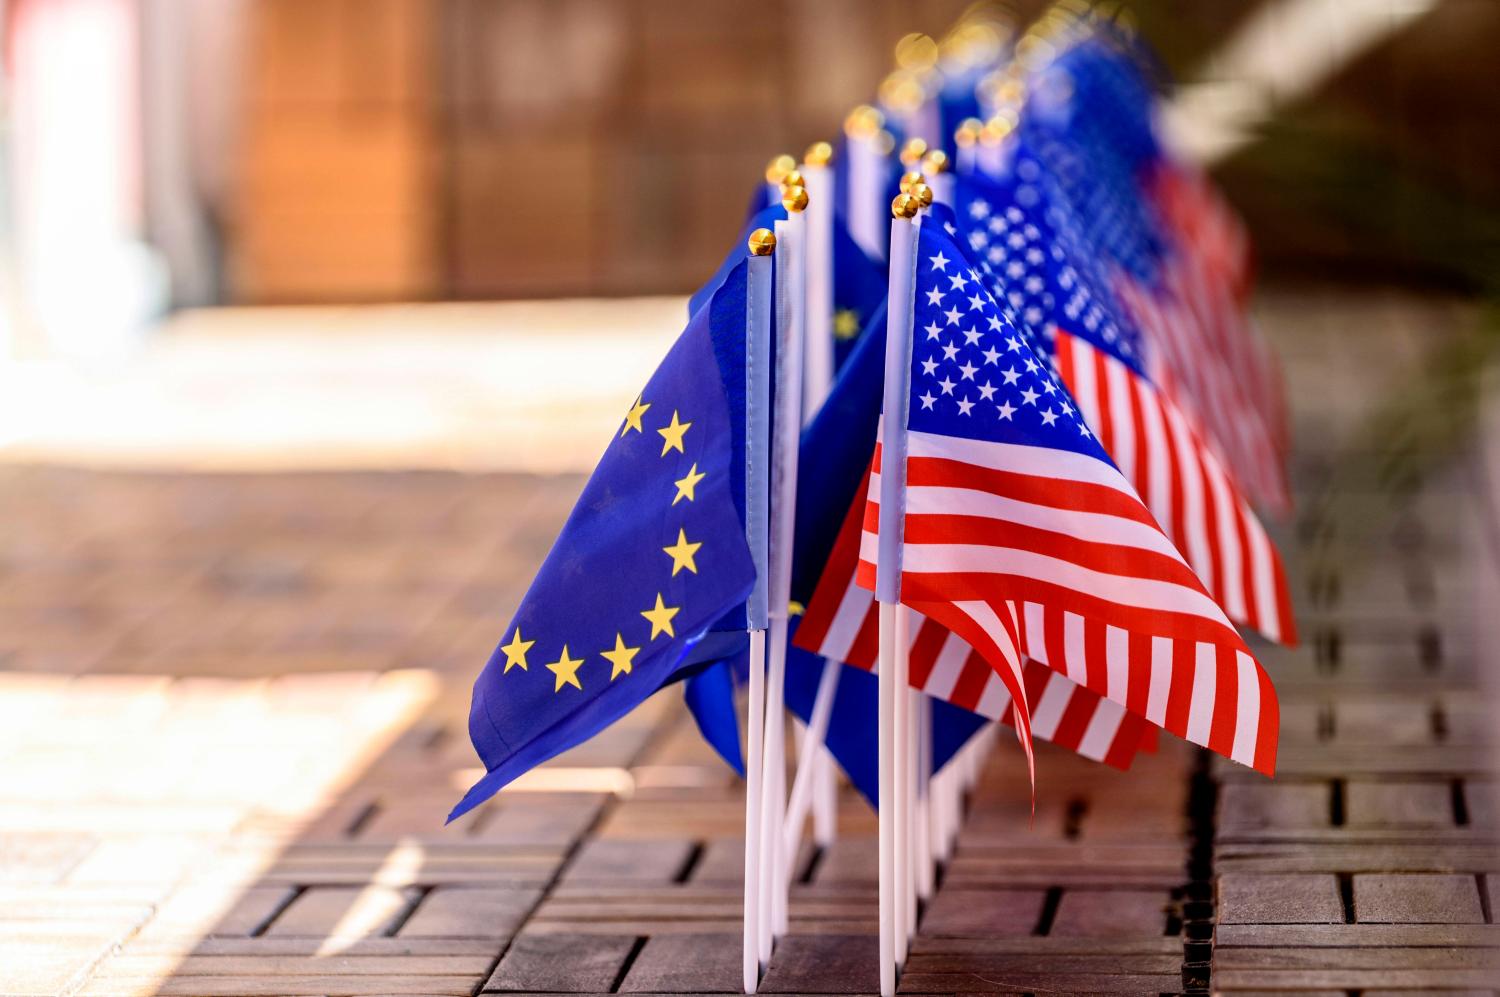 US and EU flags side-by-side. Source: REUTERS